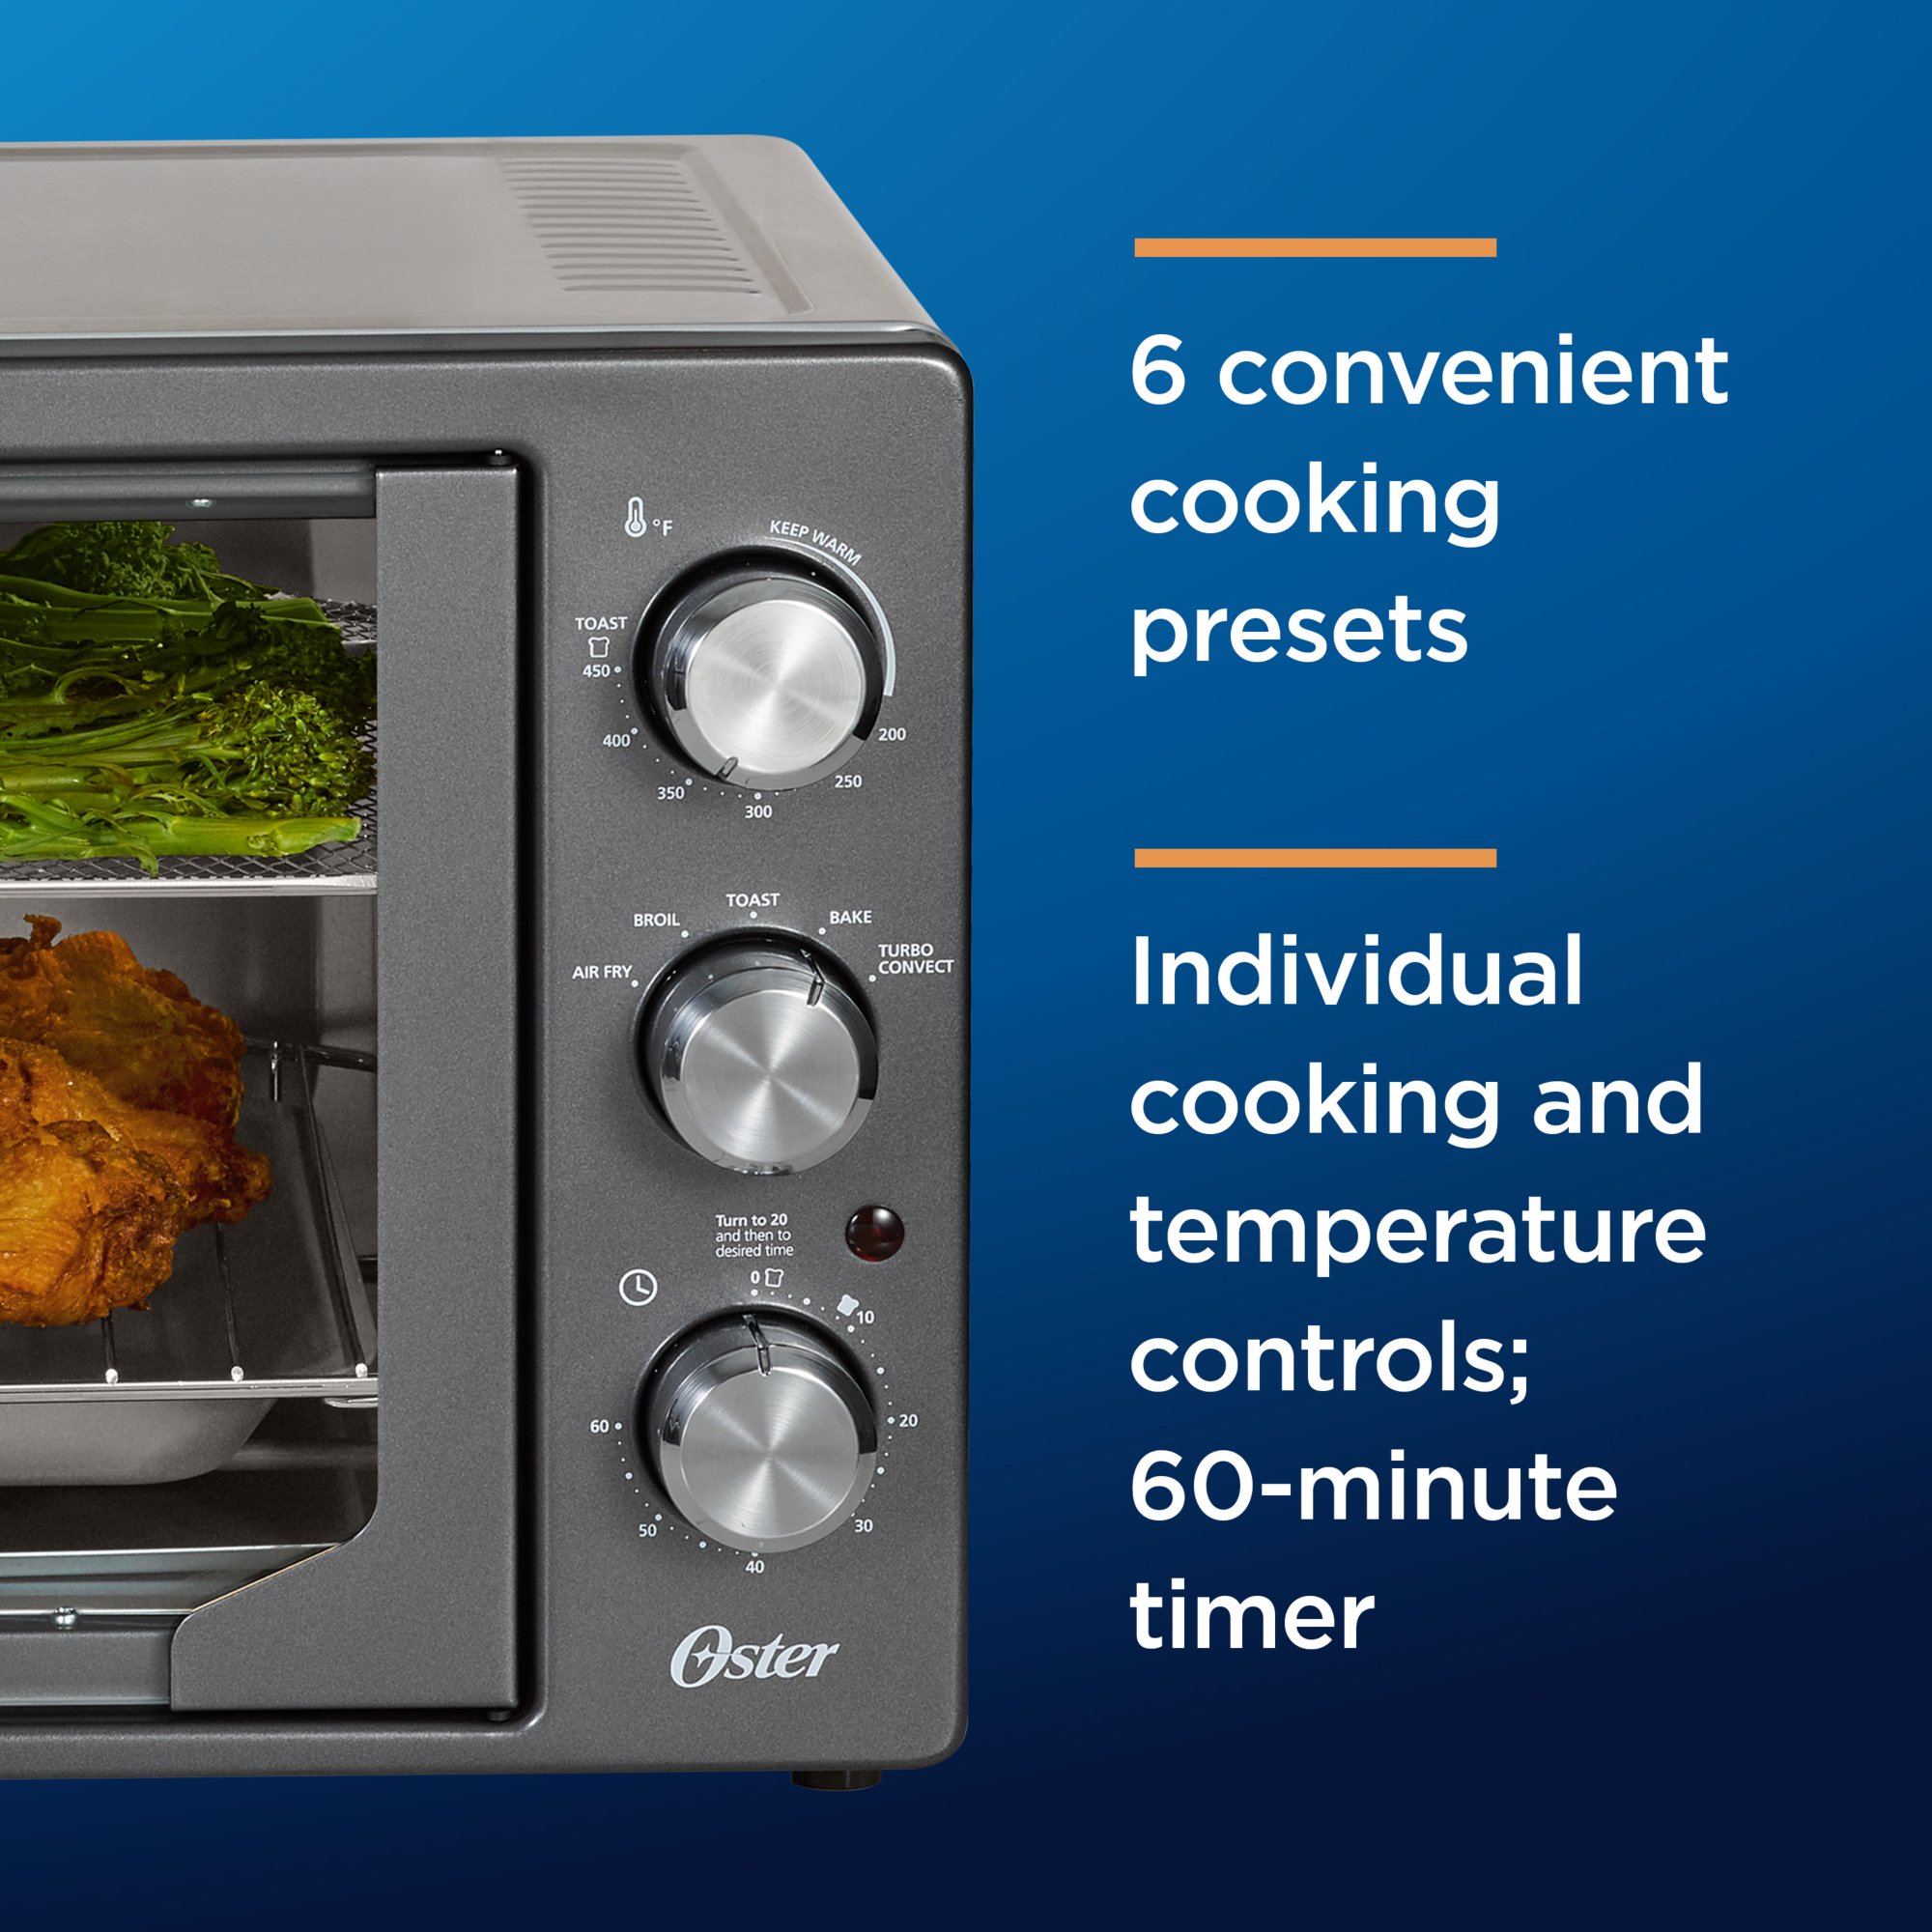 This huge French-door toaster oven from Oster is $30 off on